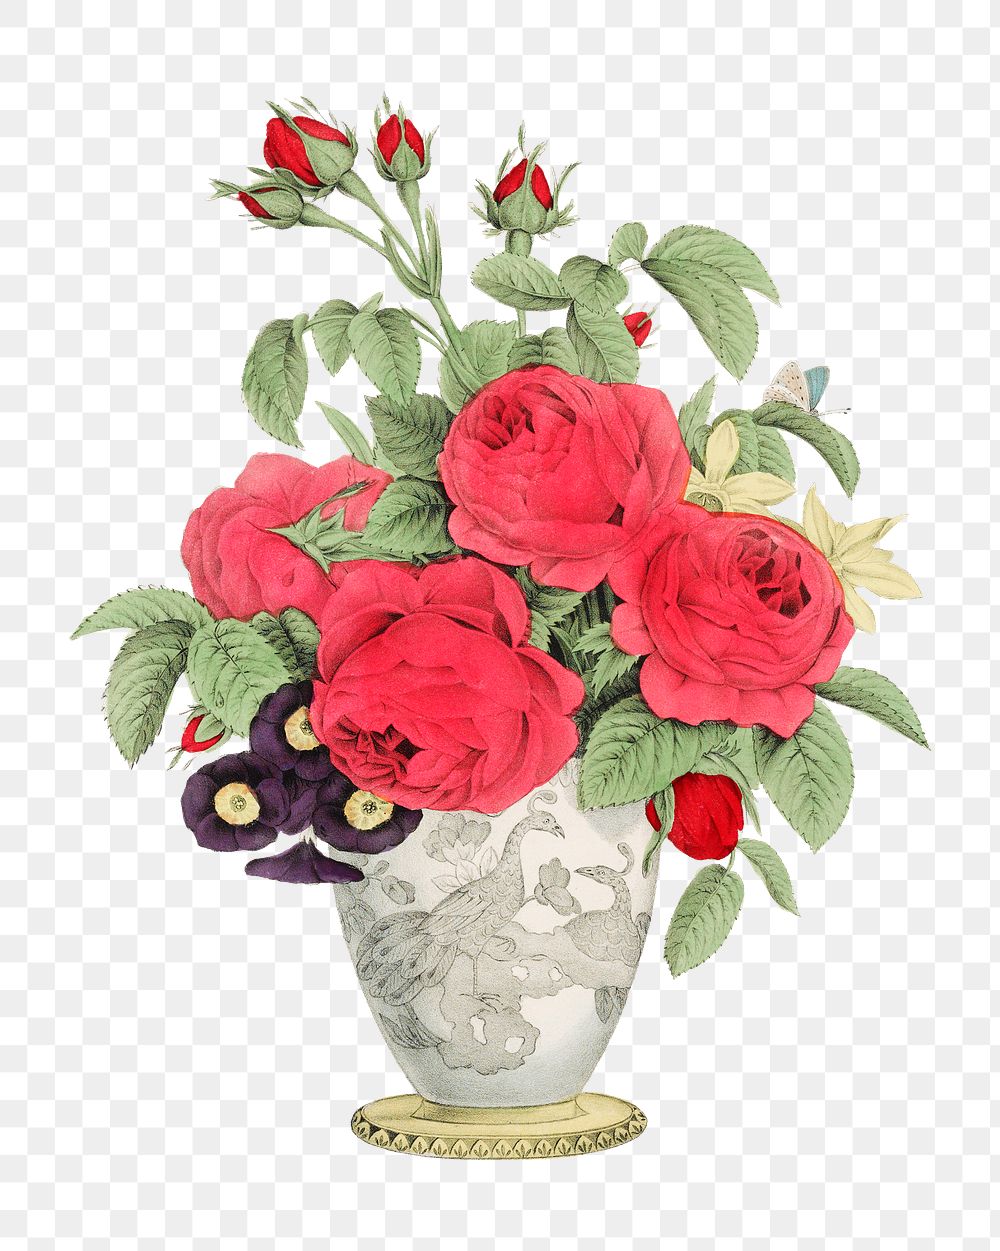 Rose bouquet png sticker, antique botanical art, remix from the artwork of Nathaniel Currier